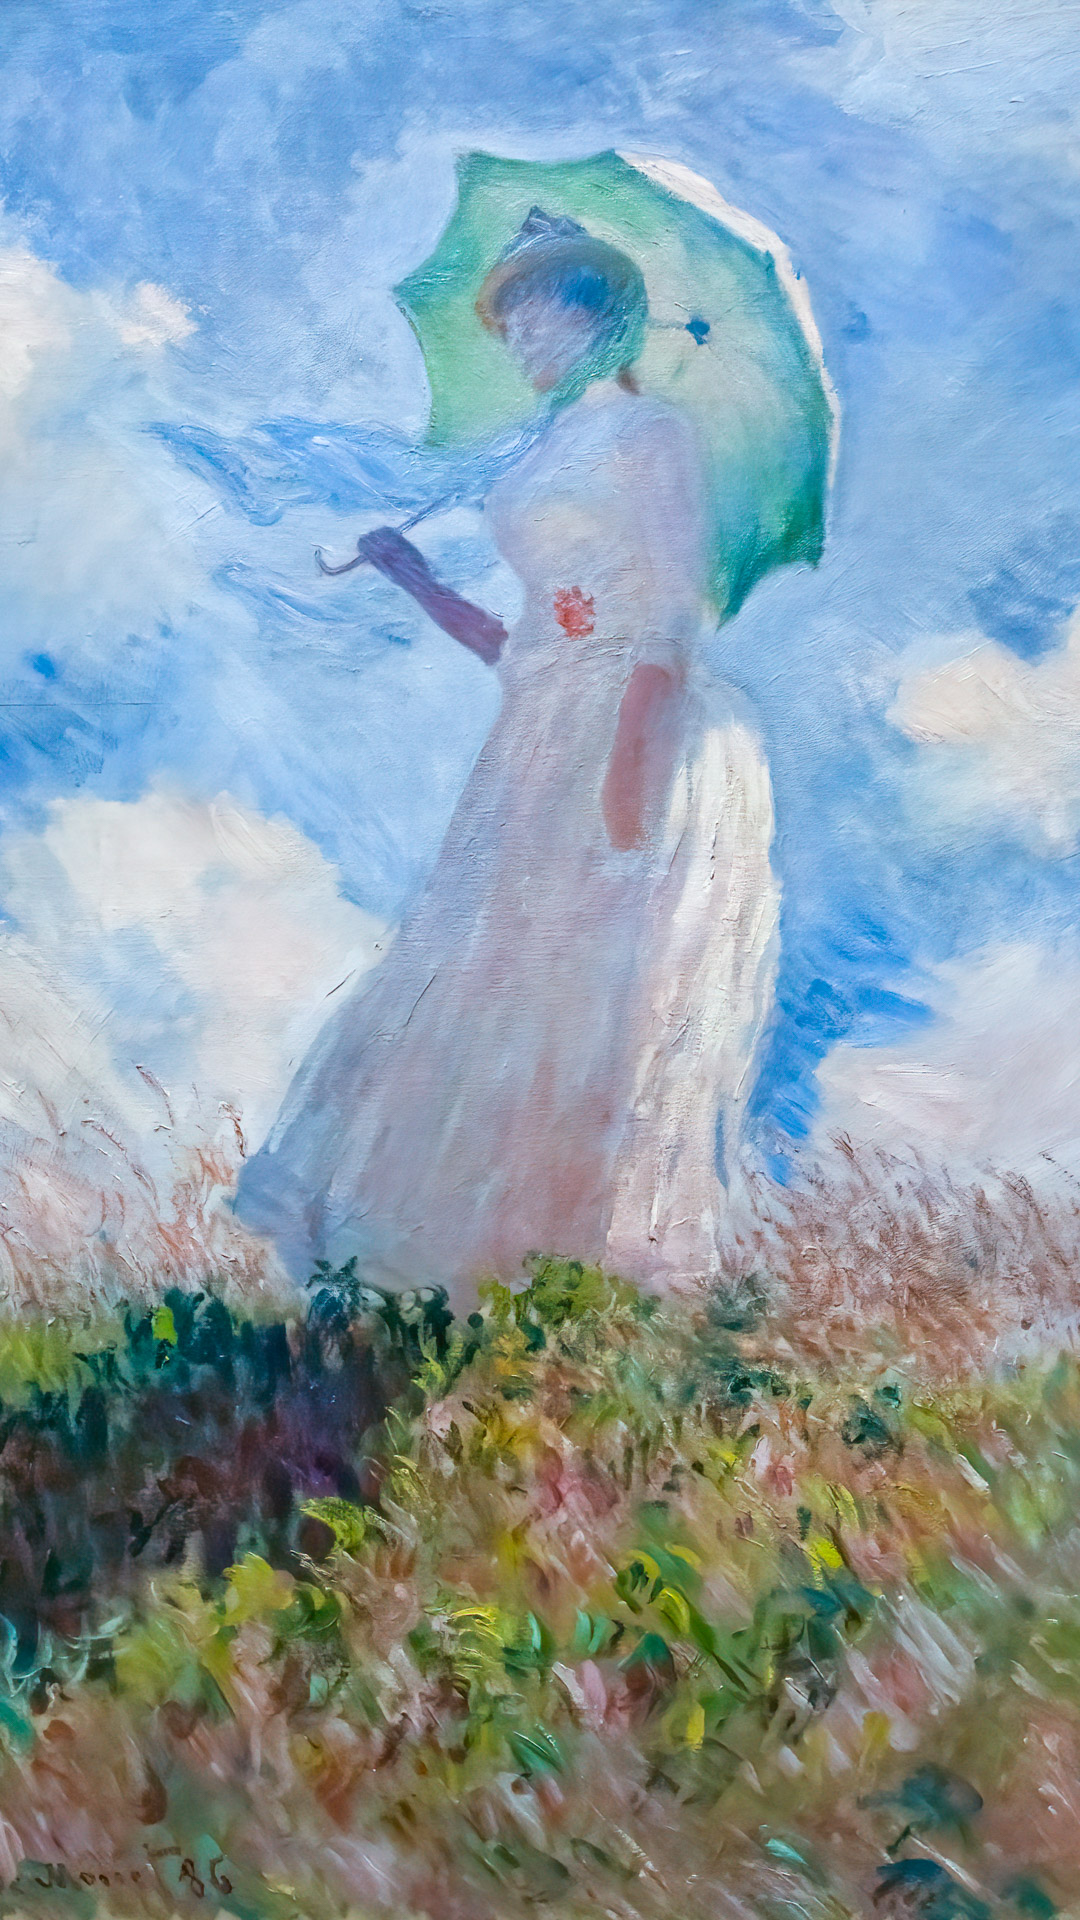 Feel the gentle breeze of artistic elegance with Claude Monet's Woman with a Parasol gracing your iPhone wallpaper.